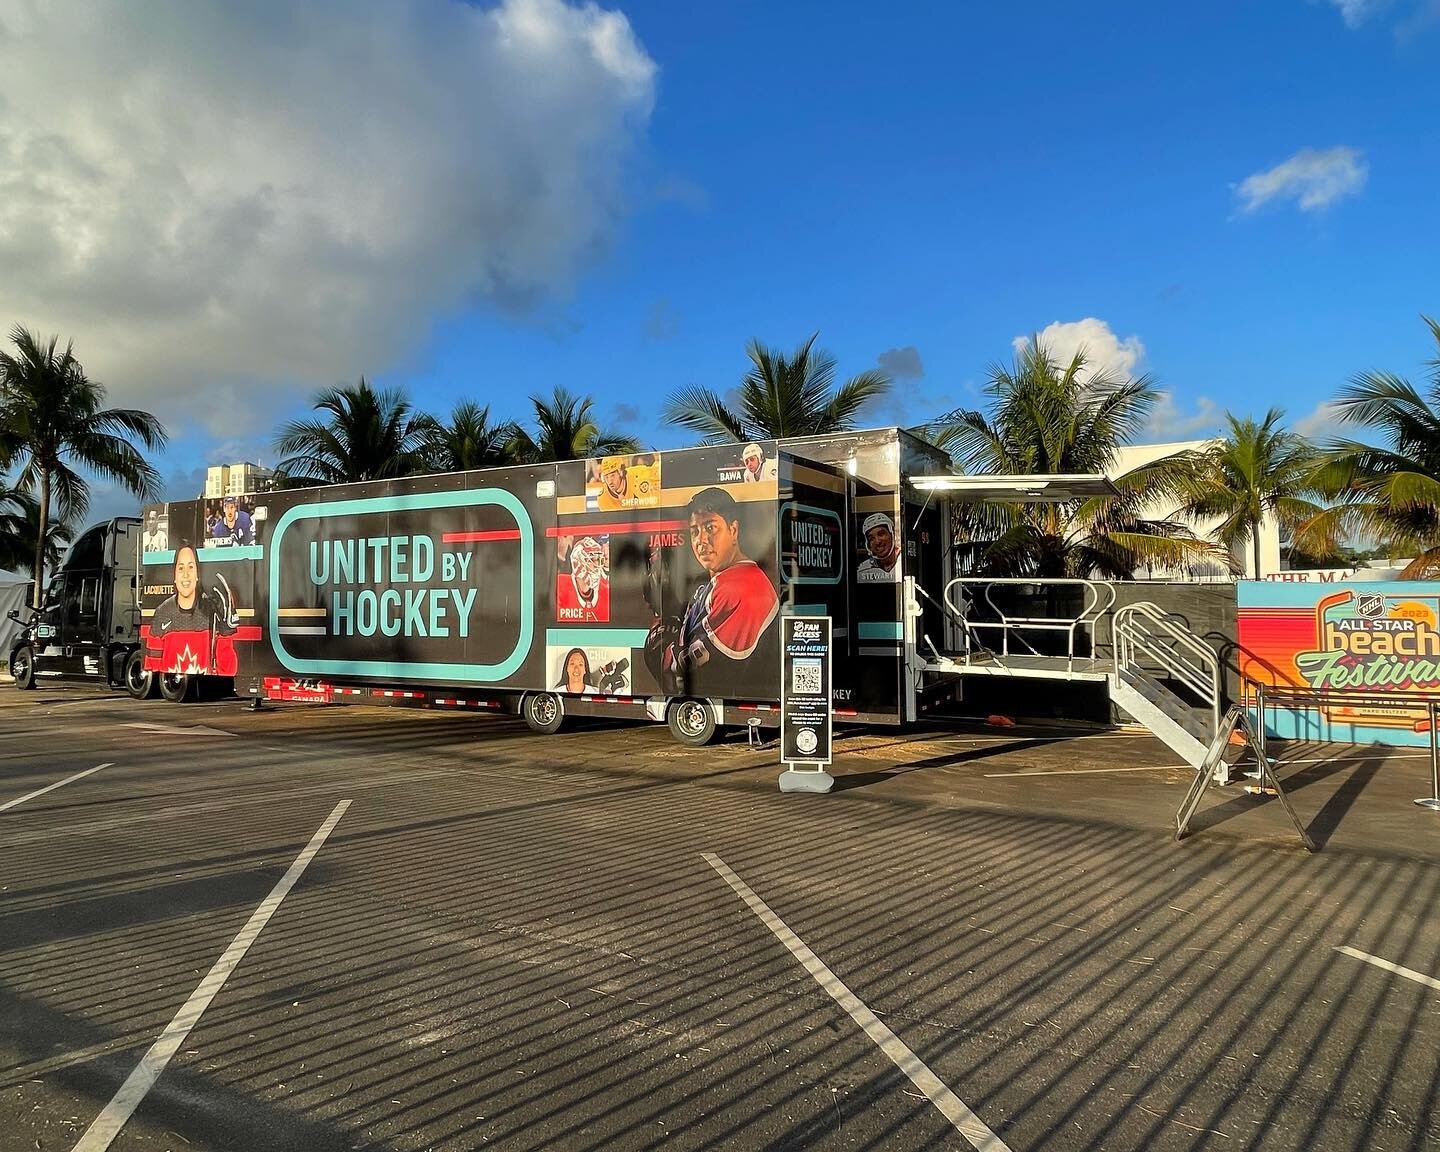 The NHL United By Hockey Mobile Museum launched in Ft. Lauderdale at the All-Star Beach Festival yesterday! It will be touring the US and Canada through June, if you&rsquo;re down there this weekend be sure to check it out. [Tour Dates in Bio].
&mdas